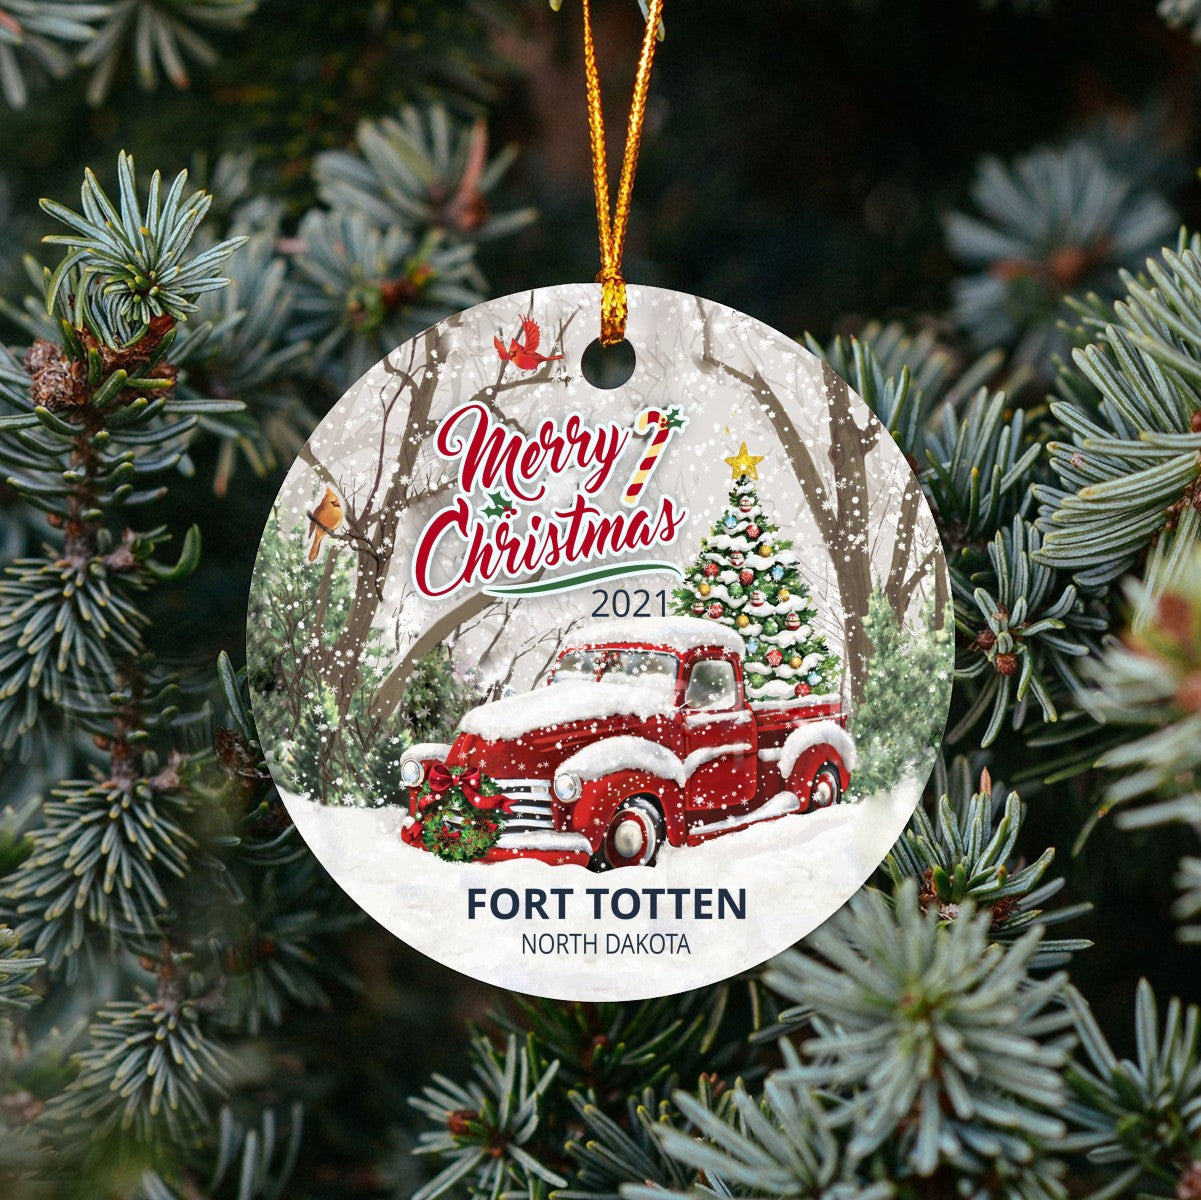 Christmas Tree Ornaments Fort Totten - Ornament With Name City, State Fort Totten North Dakota ND Ornament - Red Truck Xmas Ornaments 3'' Plastic Gift For Family, Friend And Housewarming